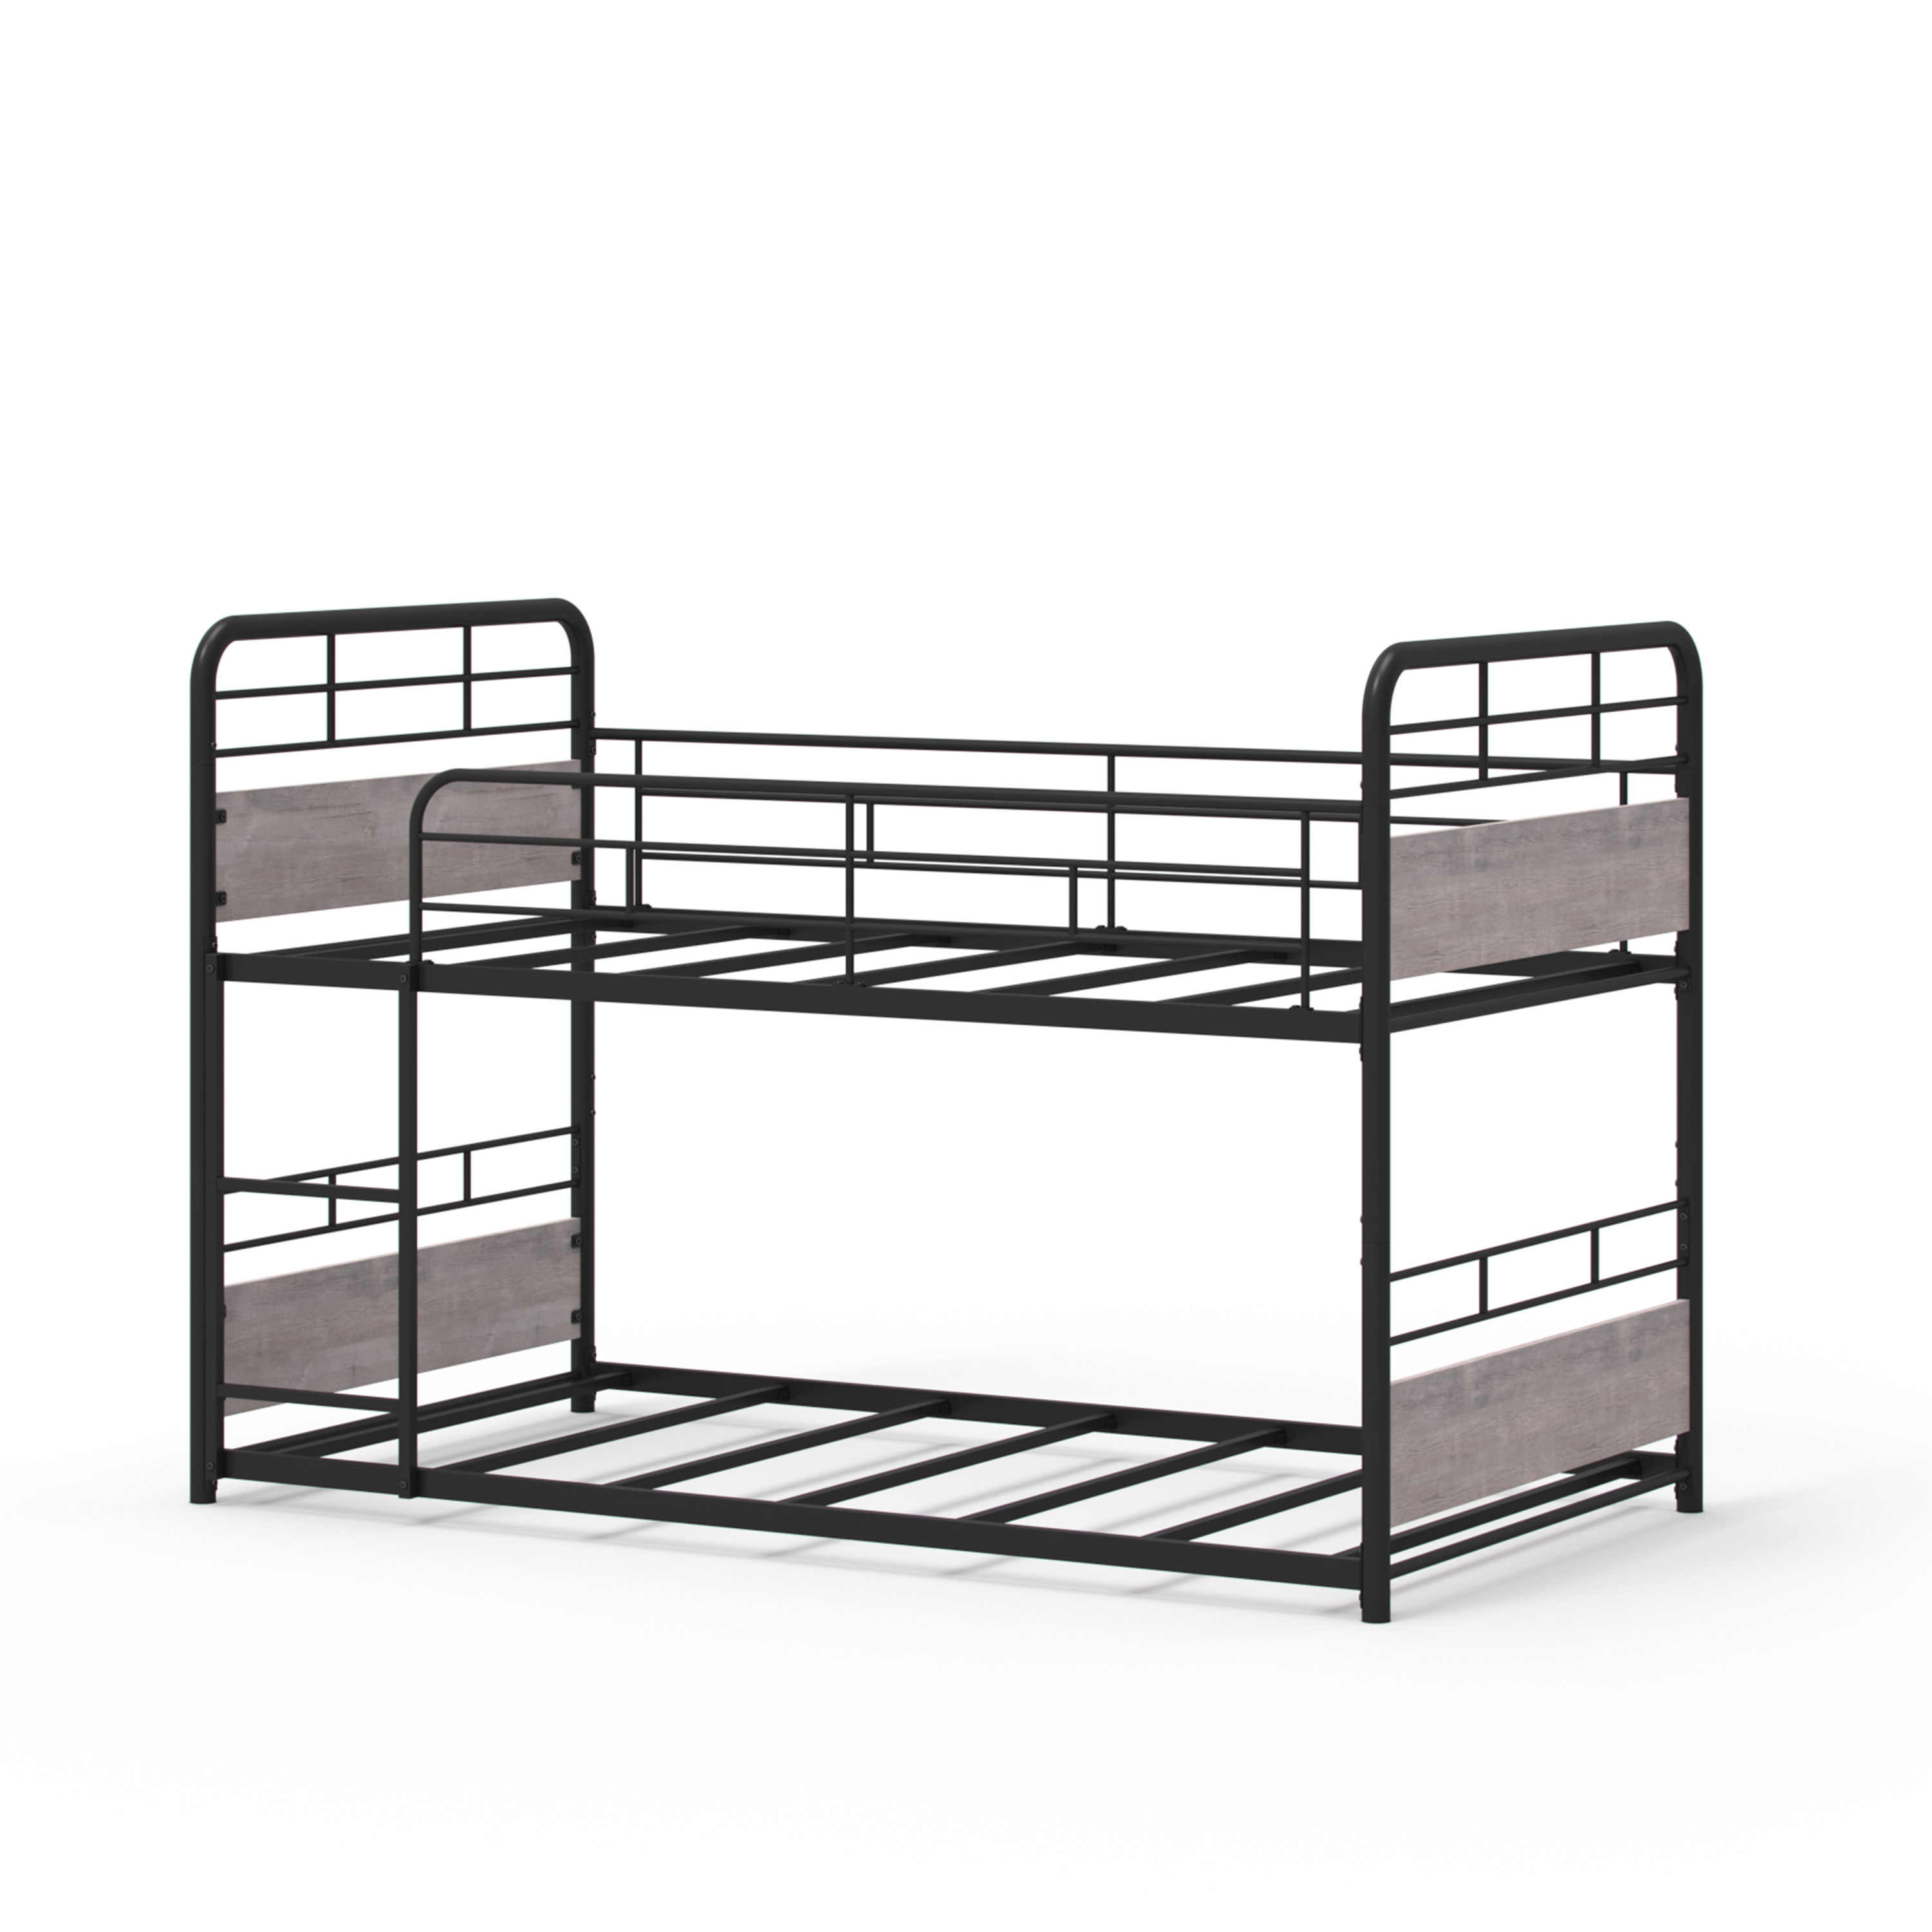 Better Homes & Gardens Anniston Convertible Black Metal Triple Twin Bunk Bed, Gray Wood Accents - image 10 of 26